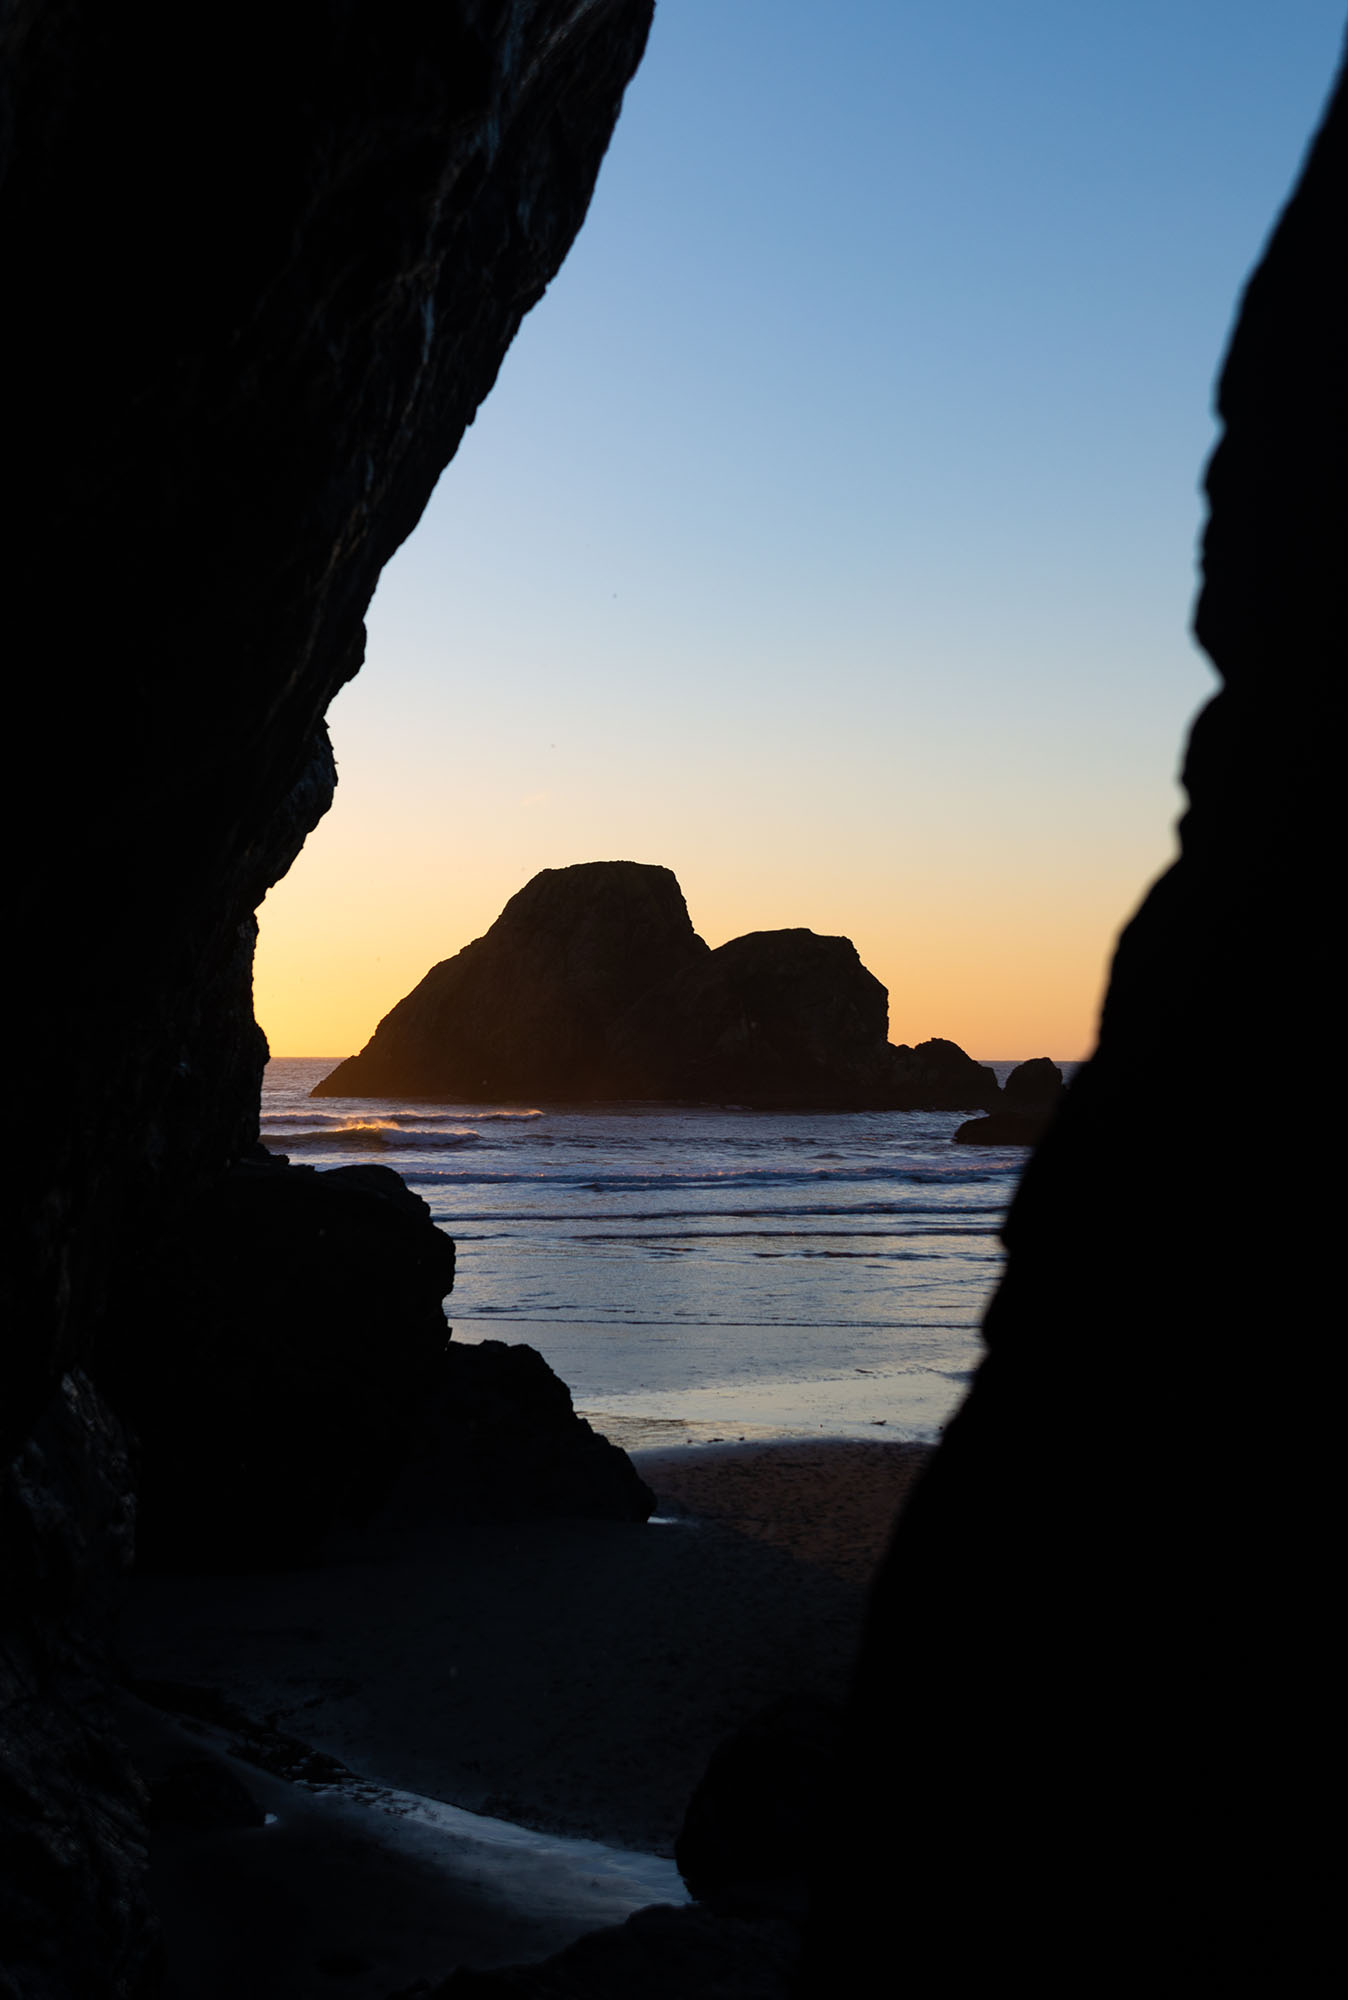 A rocky island in the ocean is framed by two large rocks. The sky is clear and the sun is setting.